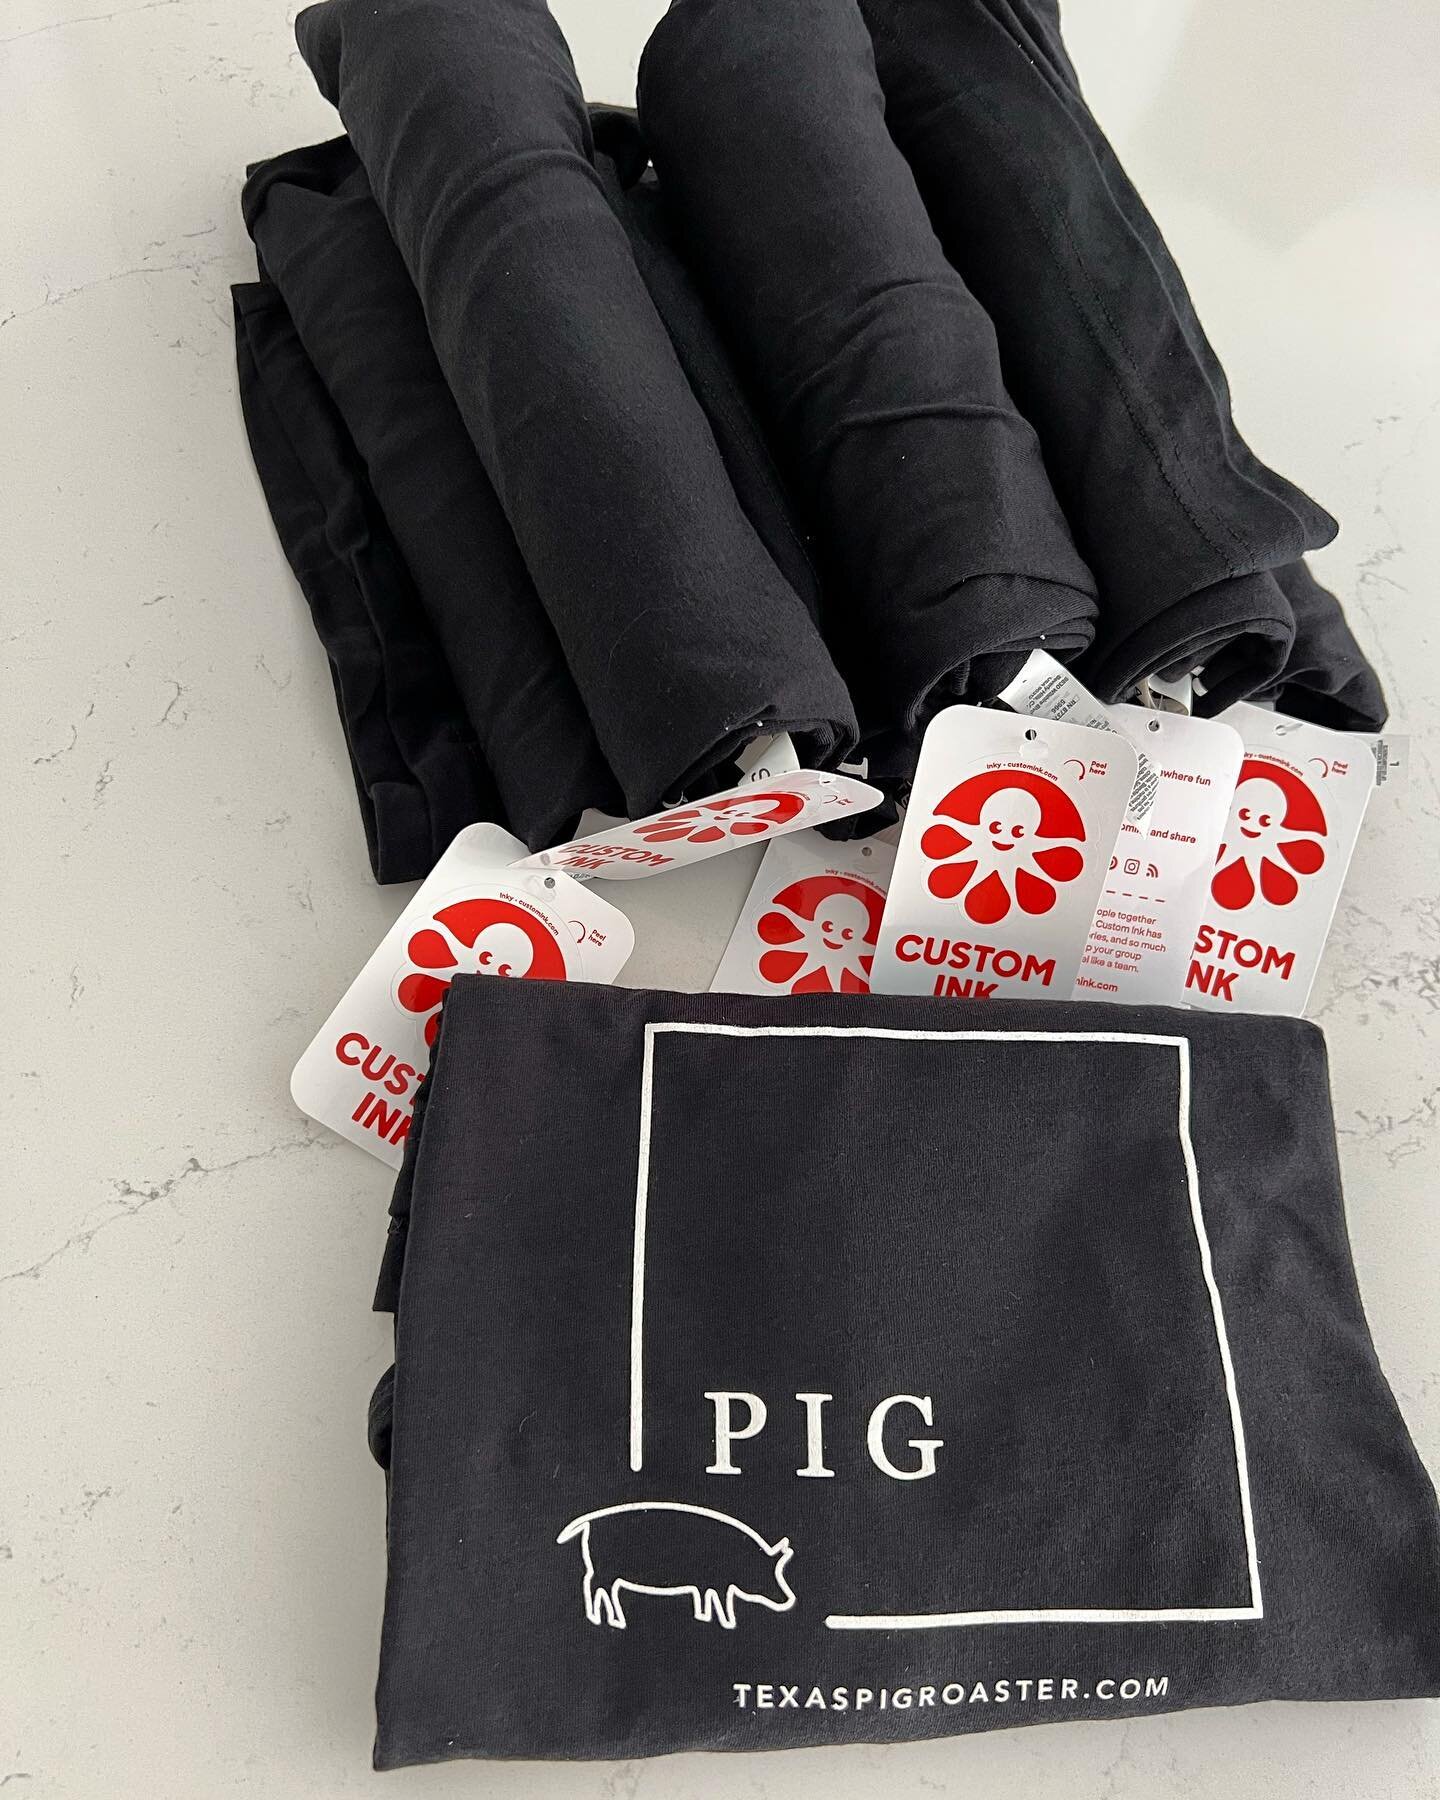 They are in!  New pig serving shirts for the awesome #texaspigroaster team!  Party season is here!
#catering 
#thewoodlandstx 
#pigpartyseason